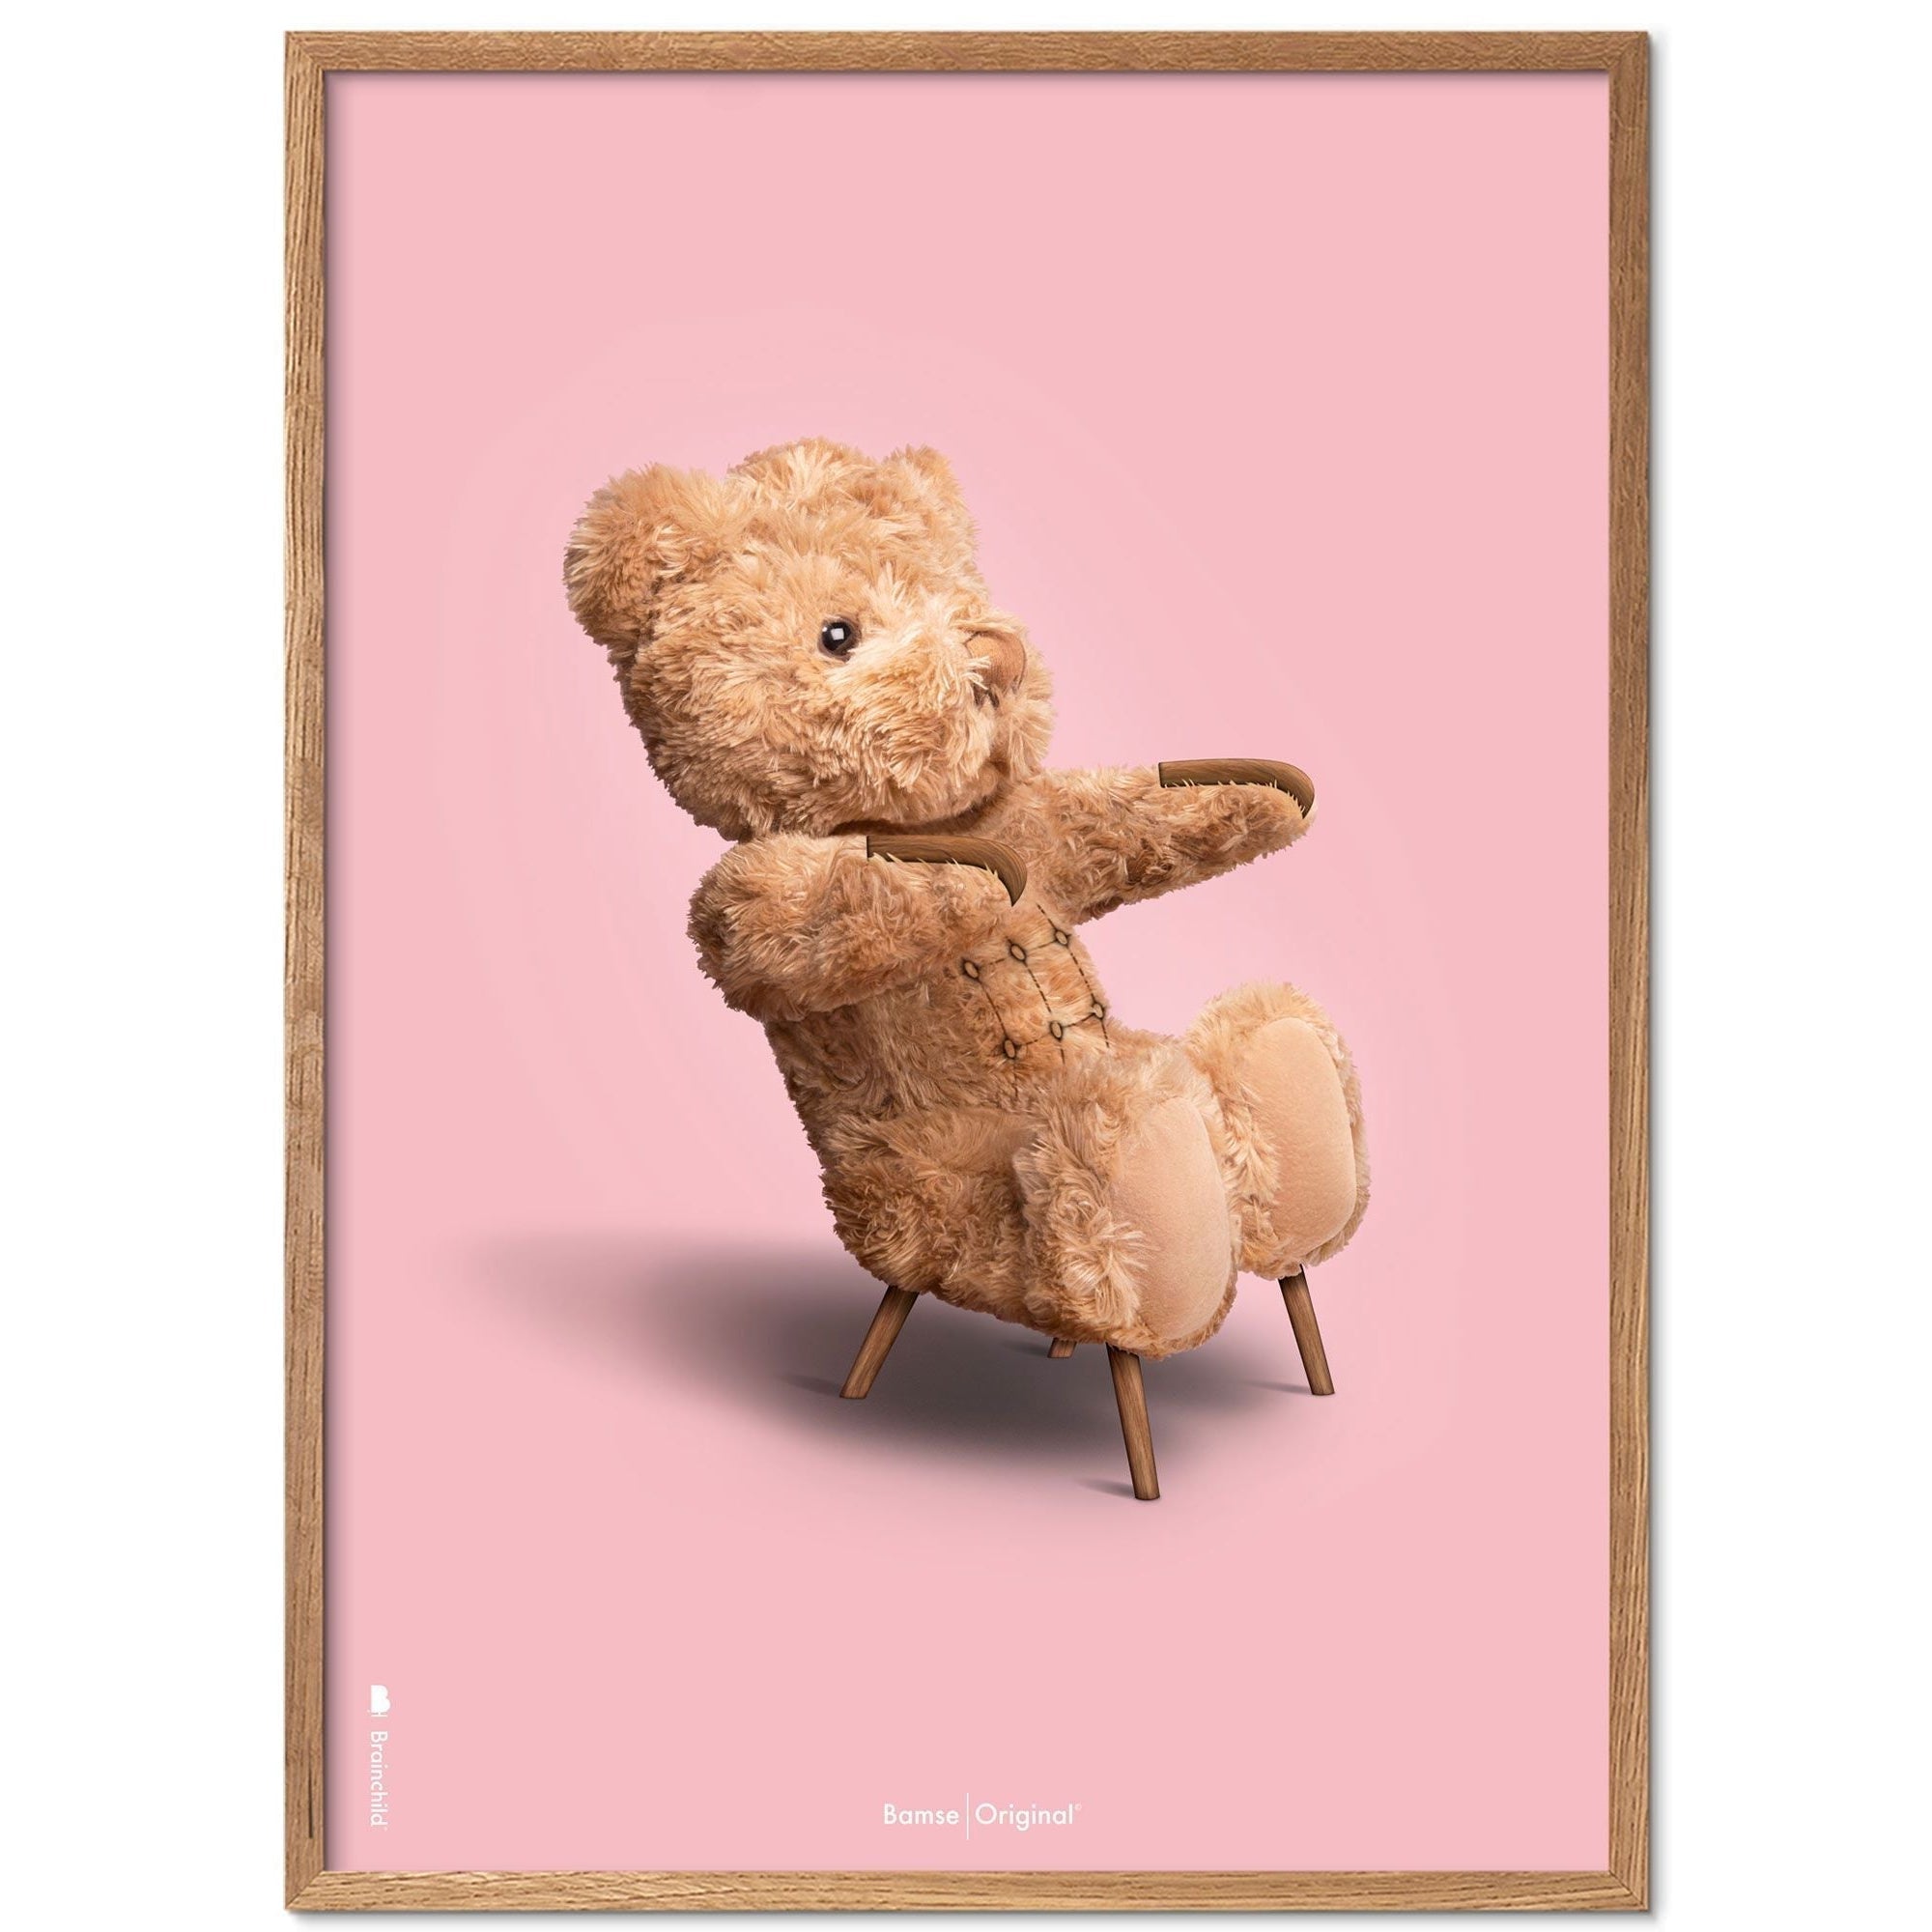 Brainchild Teddy Bear Classic Poster Frame Made Of Light Wood Ramme 50x70 Cm, Pink Background